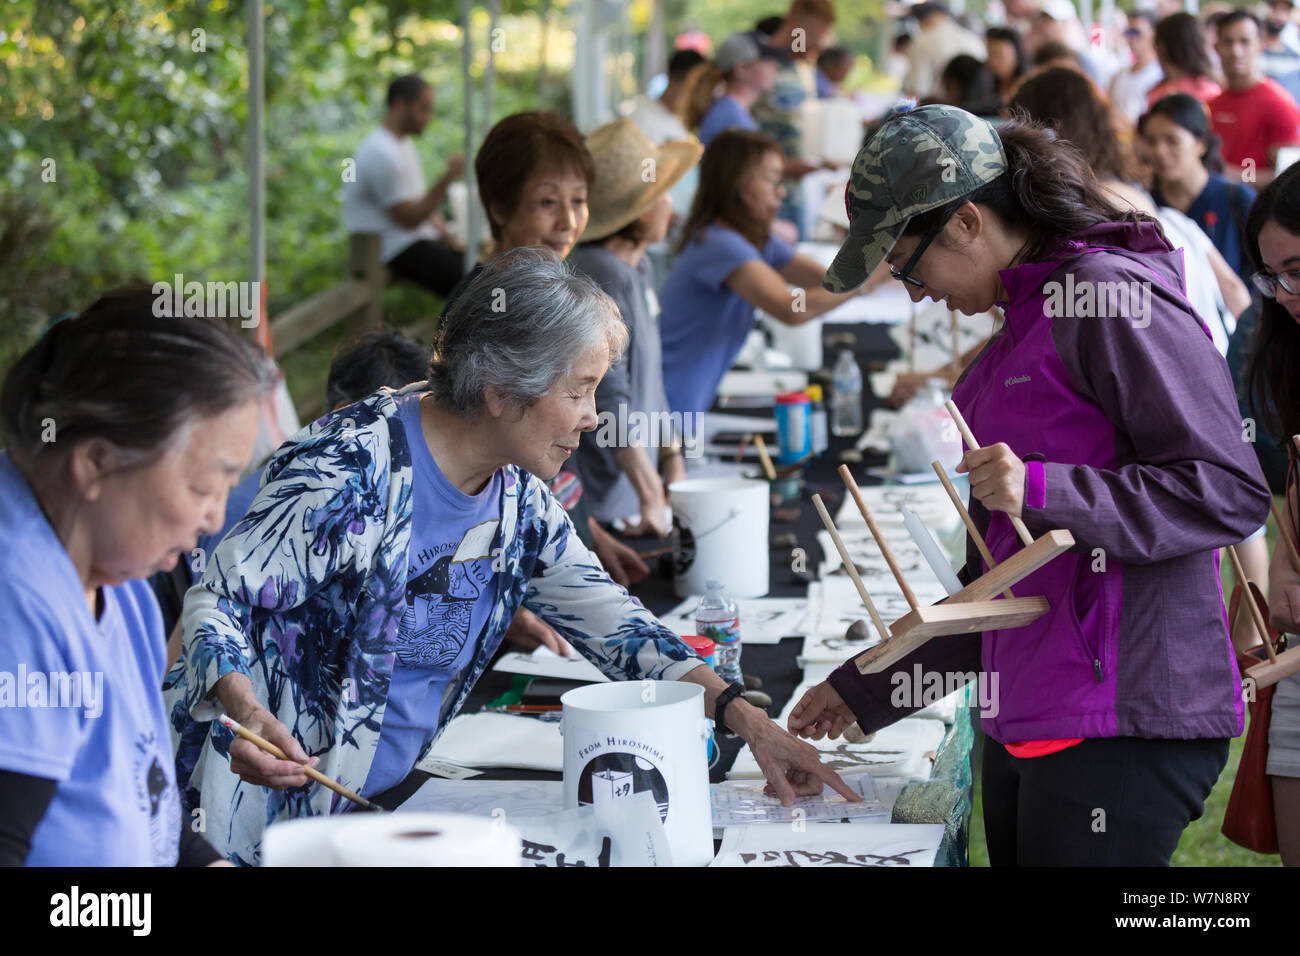 A Japanese calligrapher writes a message on a paper lantern for a women at the Toro Nagashi Lantern Floating Ceremony in Seattle, Washington on August 6, 2019. “From Hiroshima To Hope” is held in remembrance of atomic bomb victims on the anniversary of the bombing of Hiroshima, Japan. The ceremony, organized by a collation of peace, religious, civil liberties and cultural heritage organizations, honors victims of the bombings of Hiroshima and Nagasaki, and all victims of violence. It is an adaptation of an ancient Japanese Buddhist ritual, the Toro Nagashi, in which lanterns representing the s Stock Photo